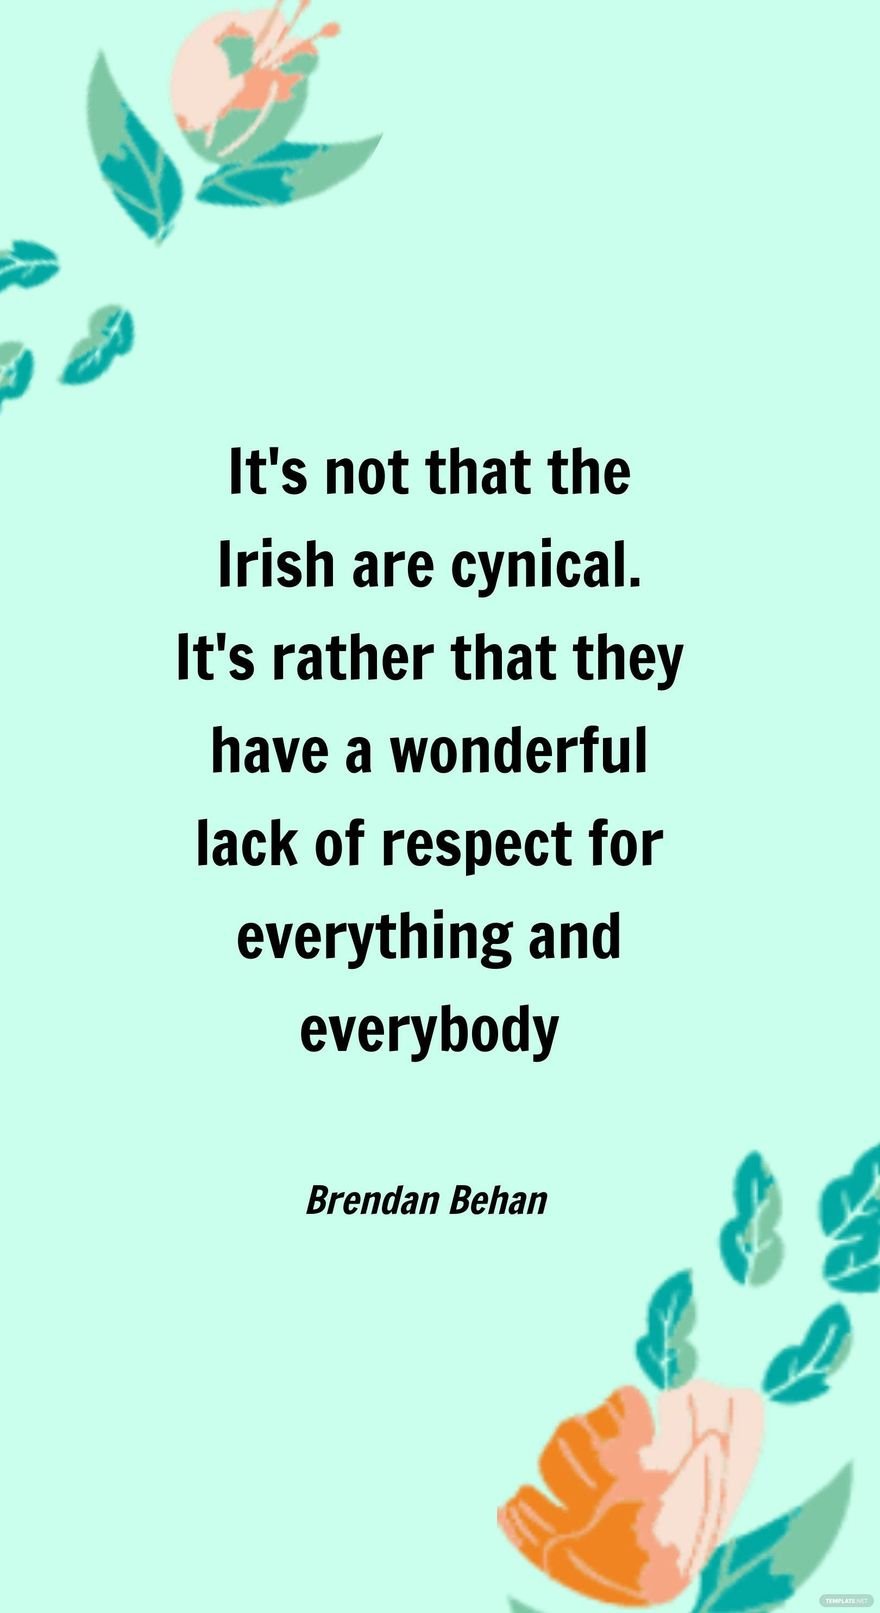 Brendan Behan- It's not that the Irish are cynical. It's rather that they have a wonderful lack of respect for everything and everybody.